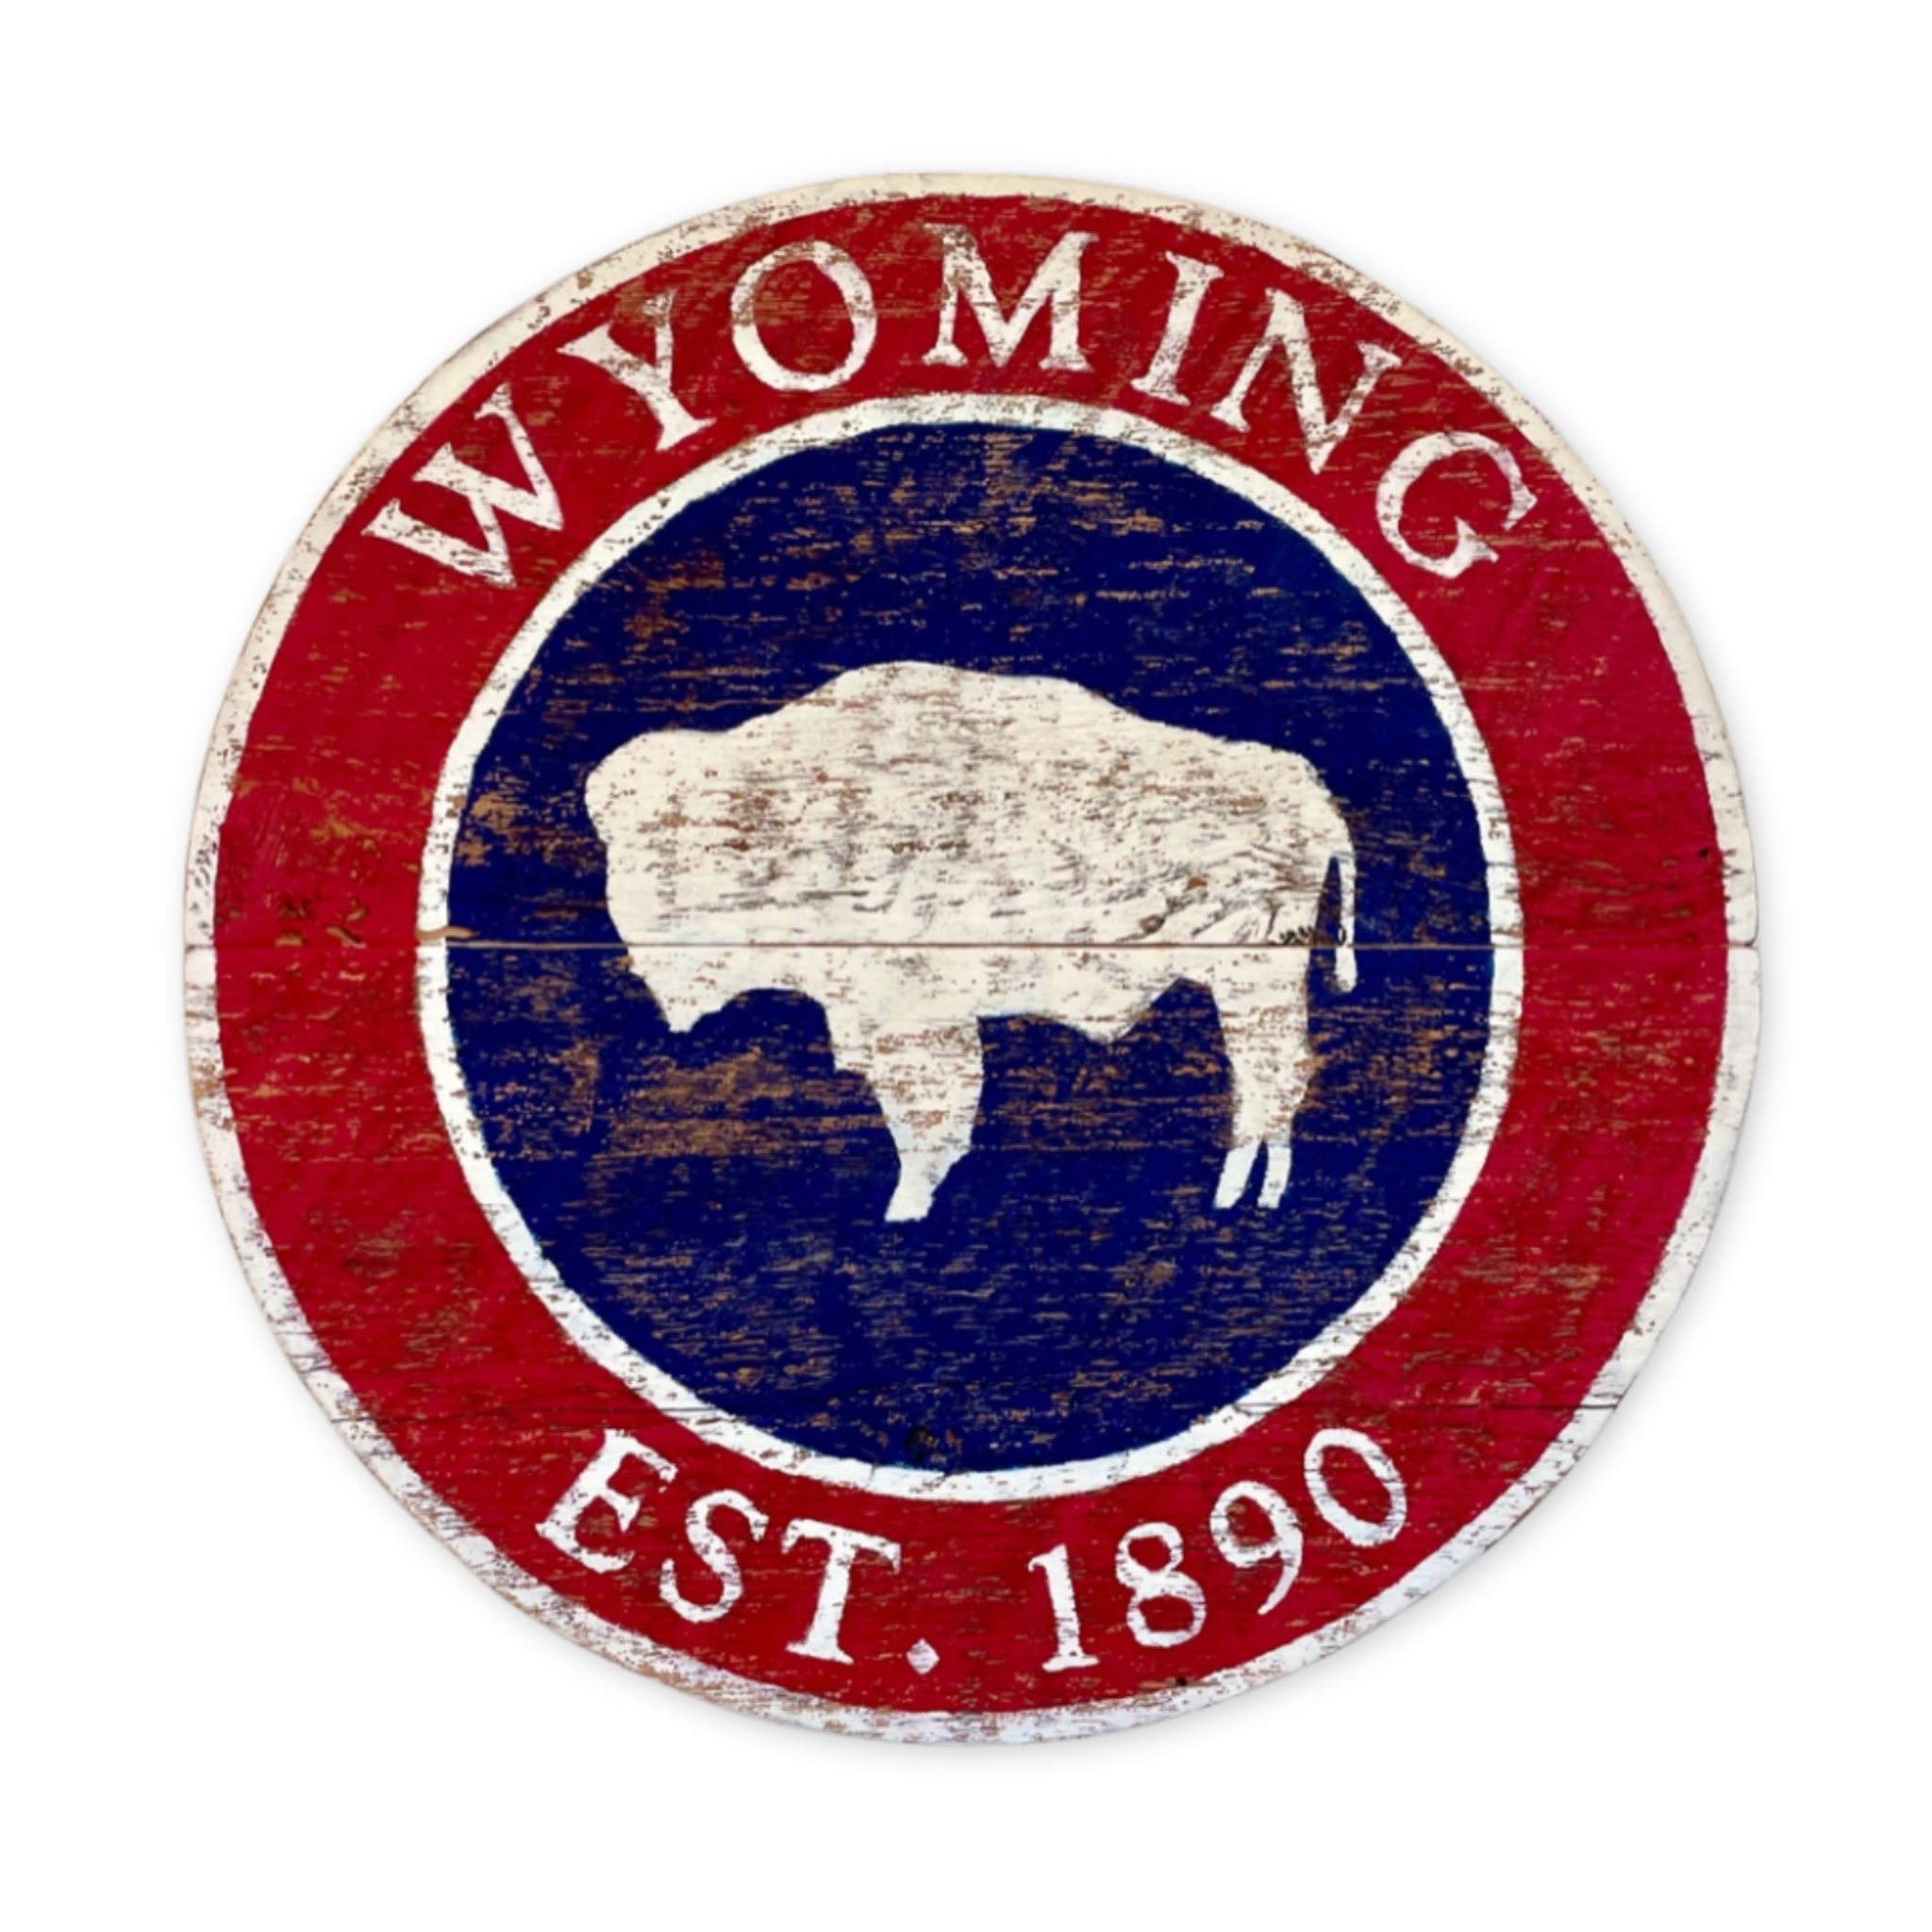 round wooden vintage inspired sign emulating the wyoming flag